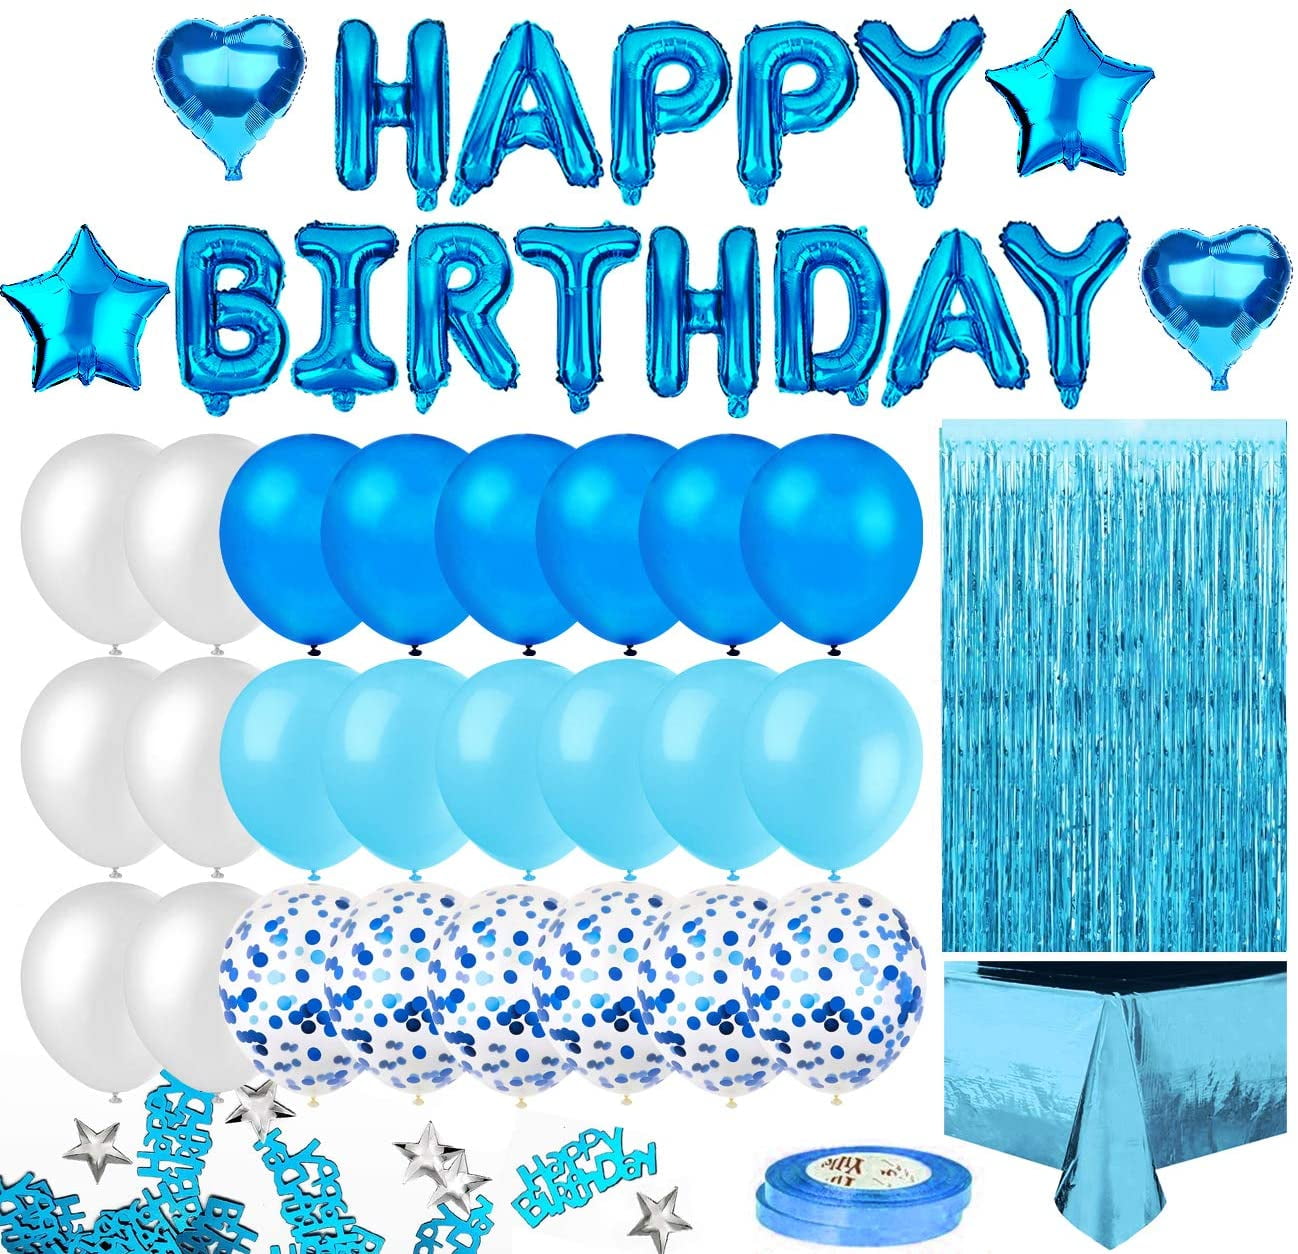 Happy Birthday Balloons Banner Balloon Bunting Party Decoration Self Inflating Blue eWorld Direct